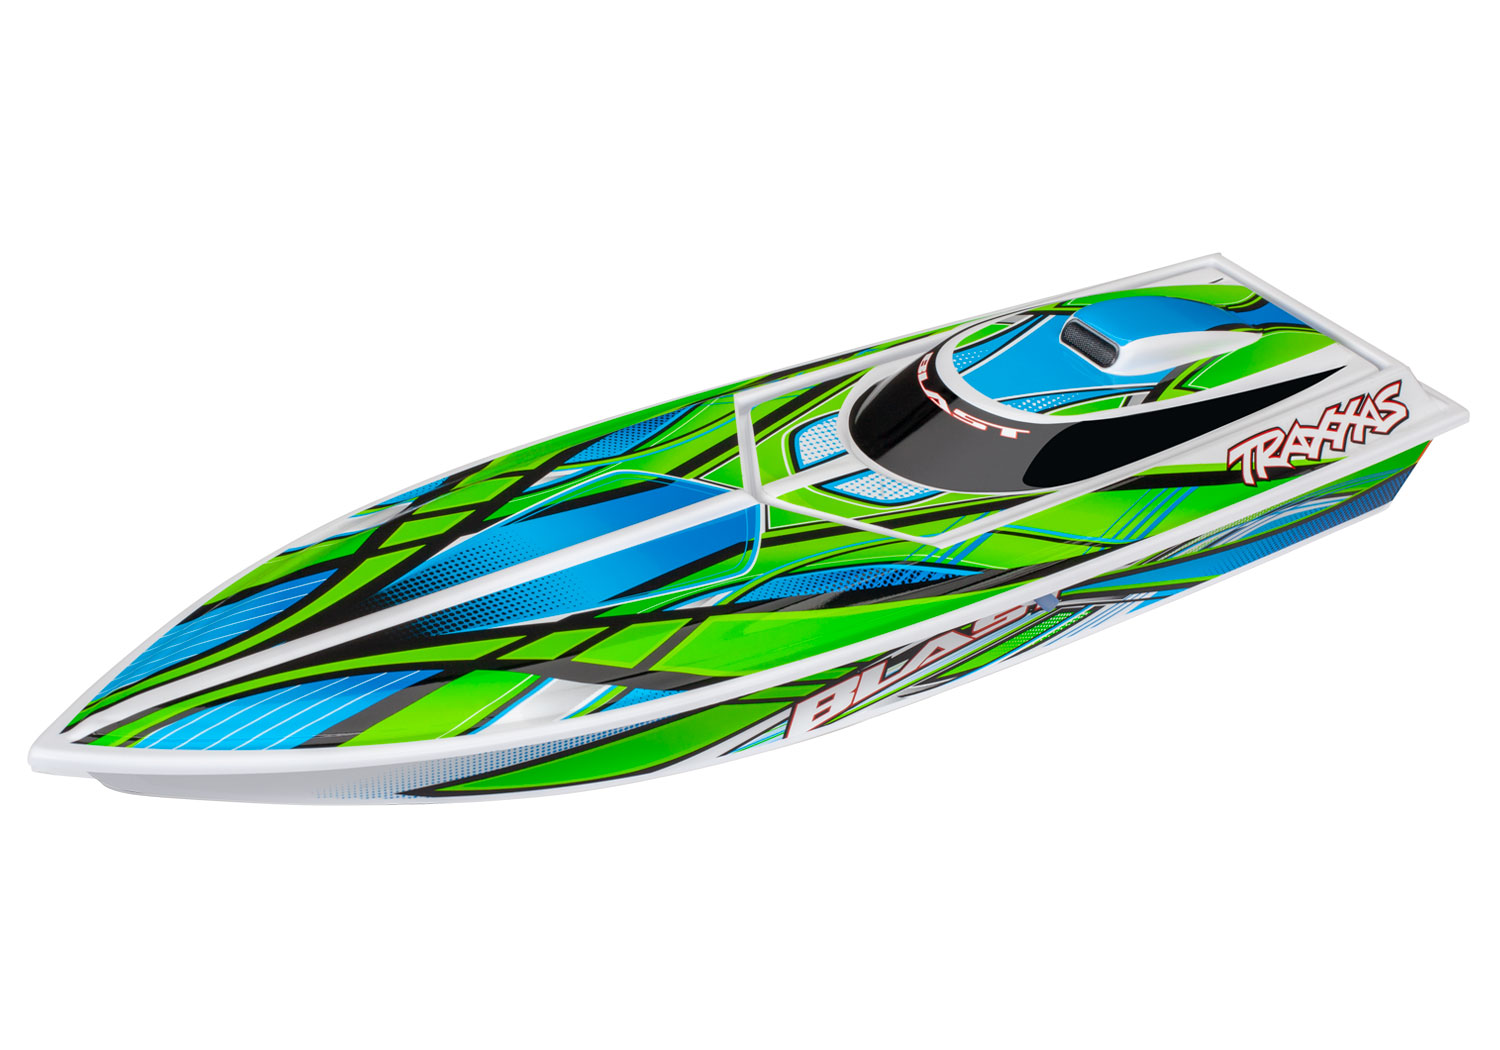 interferentie duisternis prototype Traxxas BLAST High Performance RC Boat TQ inclusief accu en lader